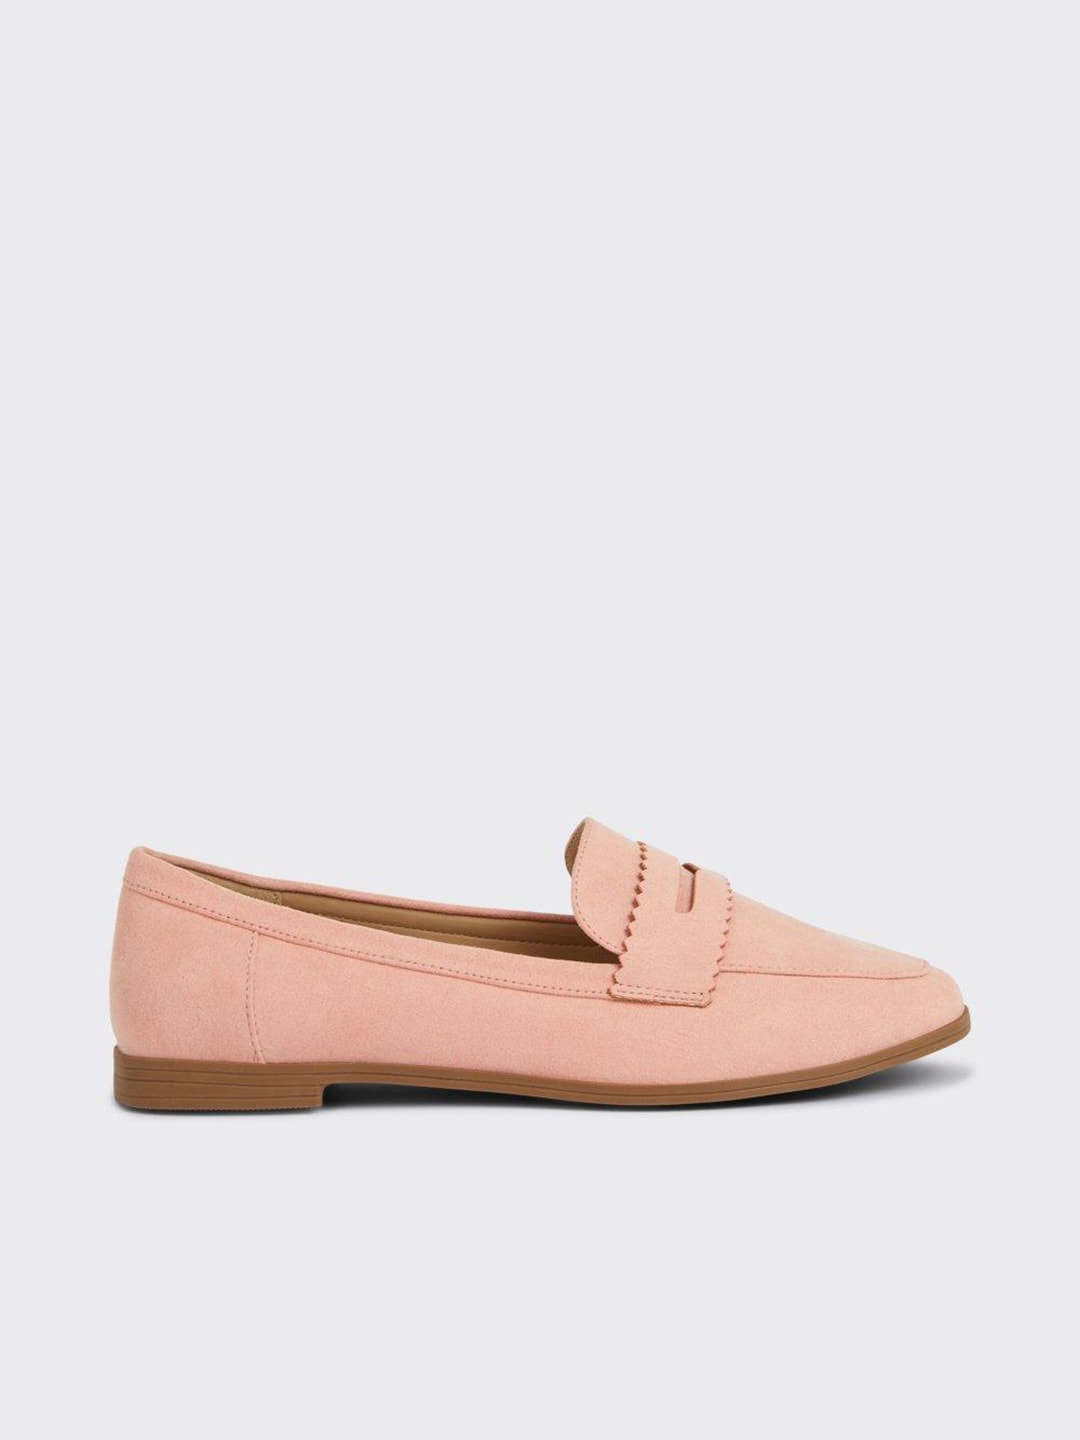 DOROTHY PERKINS Women Pink Loafers Price in India